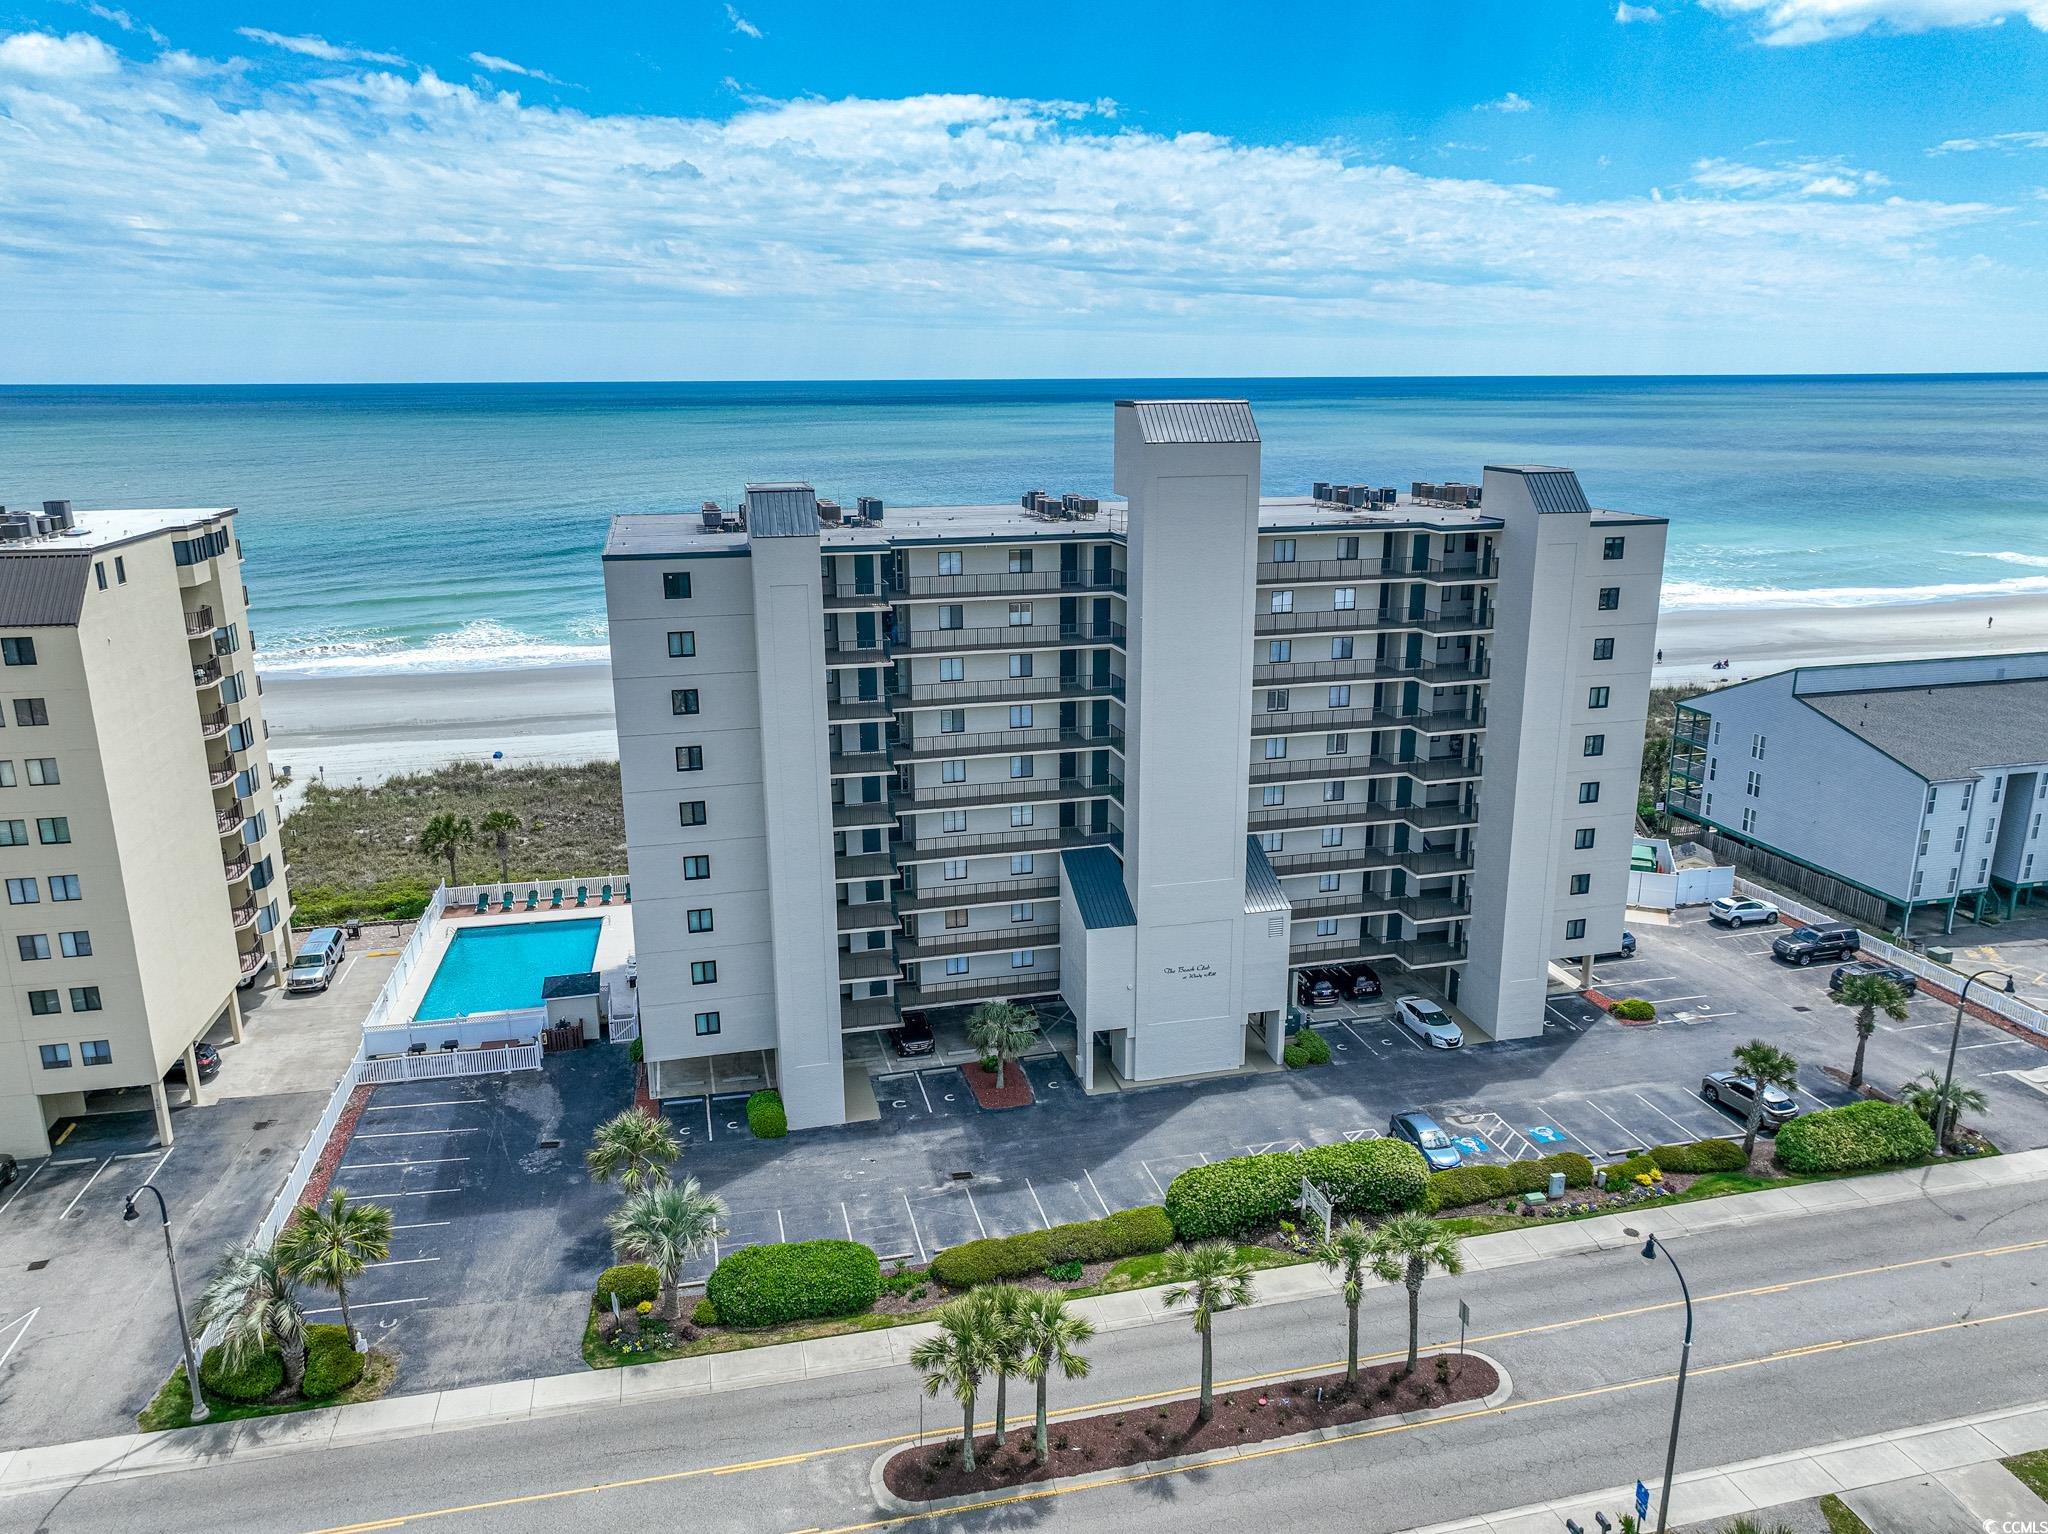 magnificent views of the beach from this oceanfront, fifth floor end unit. fully furnished four bedrooms, three baths, in beach club in the highly sought after windy hill section of north myrtle beach. enjoy breathtaking sunrises and sunsets from cherry grove to myrtle beach with the 180-degree panoramic views from the balcony. enter the unit through a sizable foyer with sitting area and lockable managers closet. you will immediately take note of the professionally decorated unit with all furniture conveying.  tile and lvp flooring throughout. the kitchen boasts soft close white upper cabinets, pull out drawers for lowers, slate matte appliances, granite counters and backsplash, undercabinet lighting, a pantry, and a grand breakfast bar. spacious living room dining room combination with ceiling fan, chandelier, and large picture windows with views of the beach and a fold out sofa- this unit can comfortably sleep 10. the oceanfront primary bedroom has a ceiling fan, balcony access, walk-in closet, and a private bath with double vanity, whirlpool tub, and a stand-up shower. bedroom number two has a ceiling fan and its own private bath with vanity and a shower tub combination. bedrooms three and four have ceilings fans and share a "jack & jill" style bathroom that also has access from the hallway. other features include plantation style shutters, 60-gallon hot water heater with boosters, and laundry room with washer and dryer and shelving. beach club just had a million dollar exterior waterproofing and reskinning with overflow parking across the street and offers coded access to the elevator, private walkway to the beach, outdoor community pool, and much more. current owners have never rented the unit- it will make a fantastic primary , vacation home, or investment unit and beach club is located near shopping, dining, entertainment, hospitals, and the airport. square footage is approximate and not guaranteed. buyer responsible for verification.